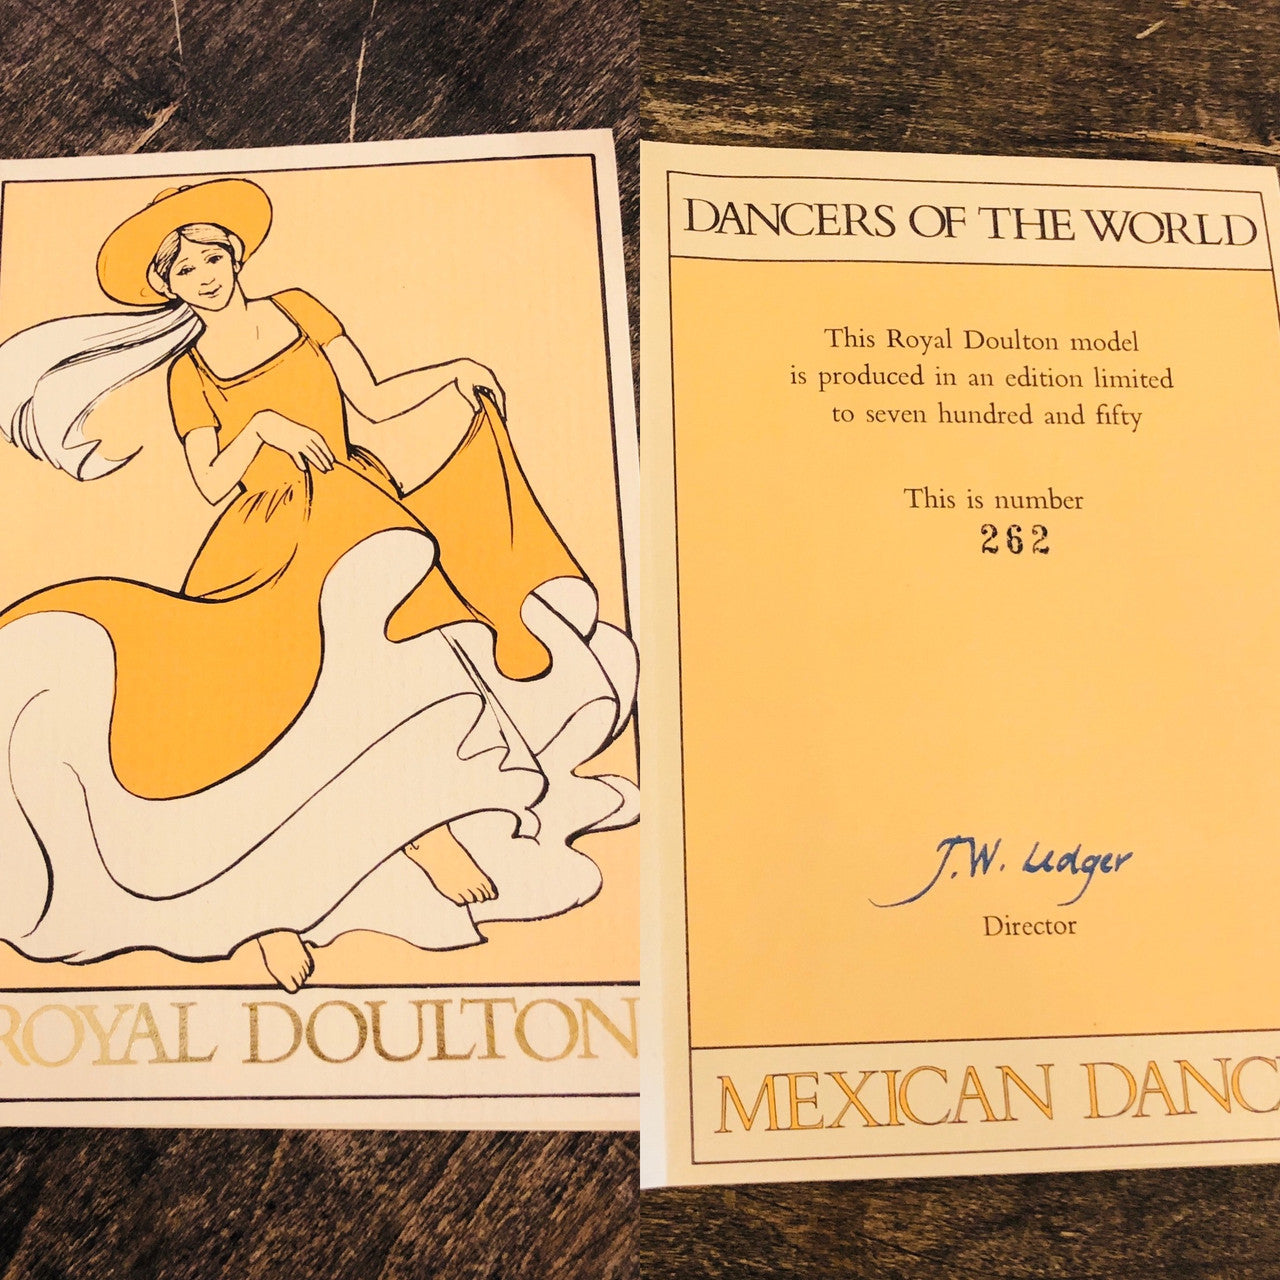 Royal Doulton, Dancers of the World, Mexican Dancer, Mexico, HN 2866, Figurine, Ceramic, Limited Edition, 1979, Peggy Davies, with Certificate